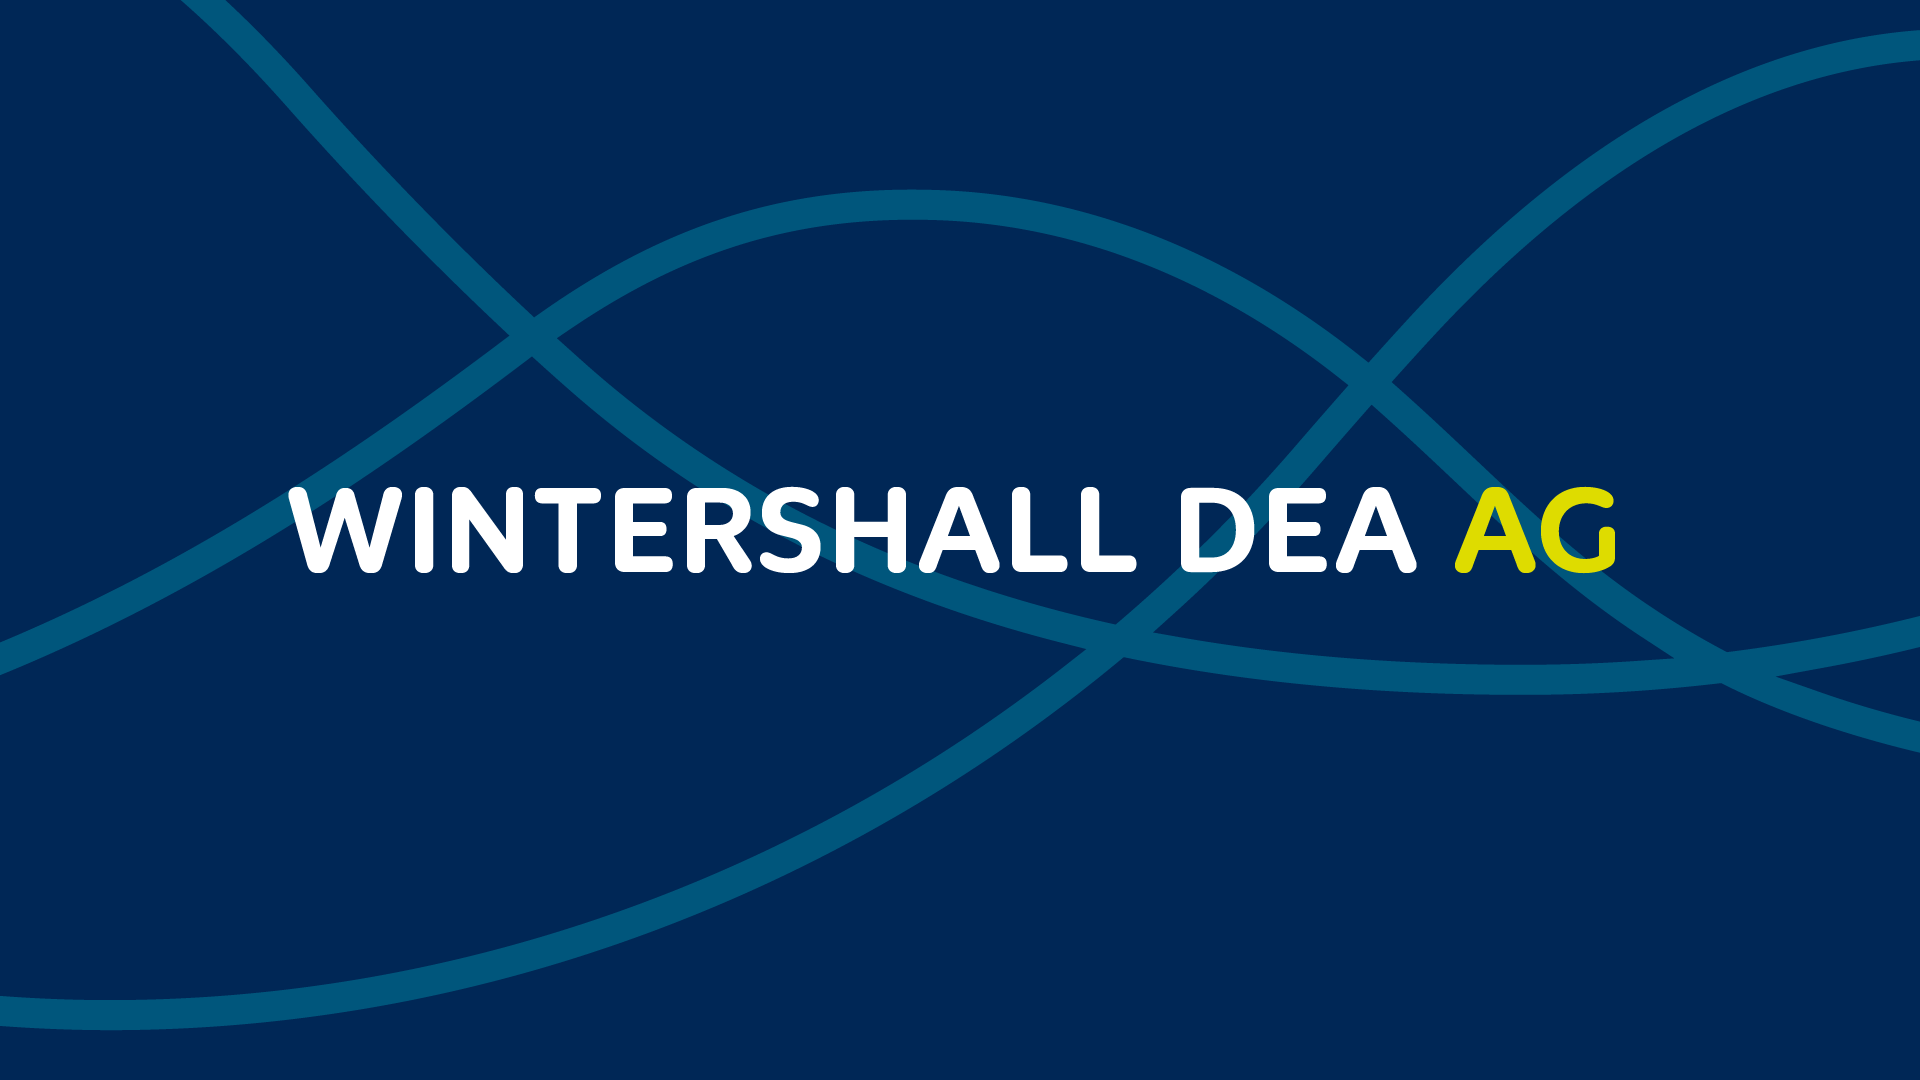 Wintershall Dea becomes a joint-stock company